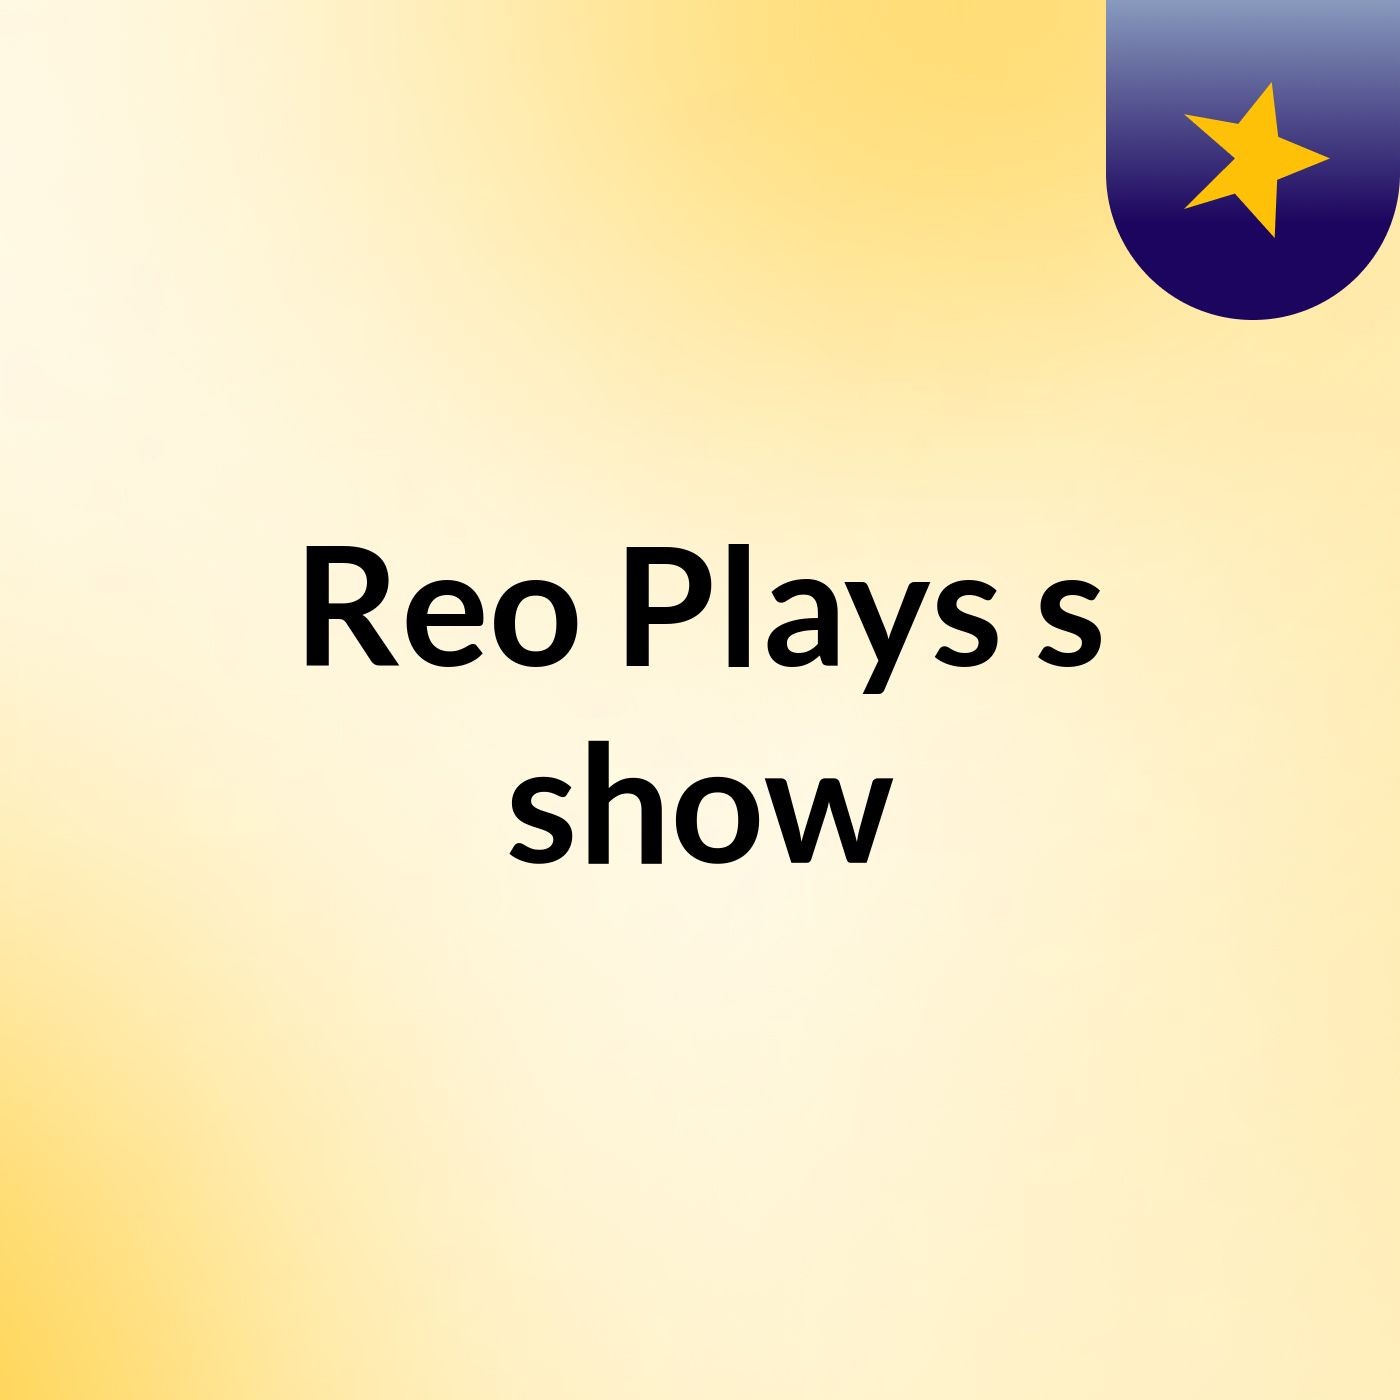 Reo Plays's show